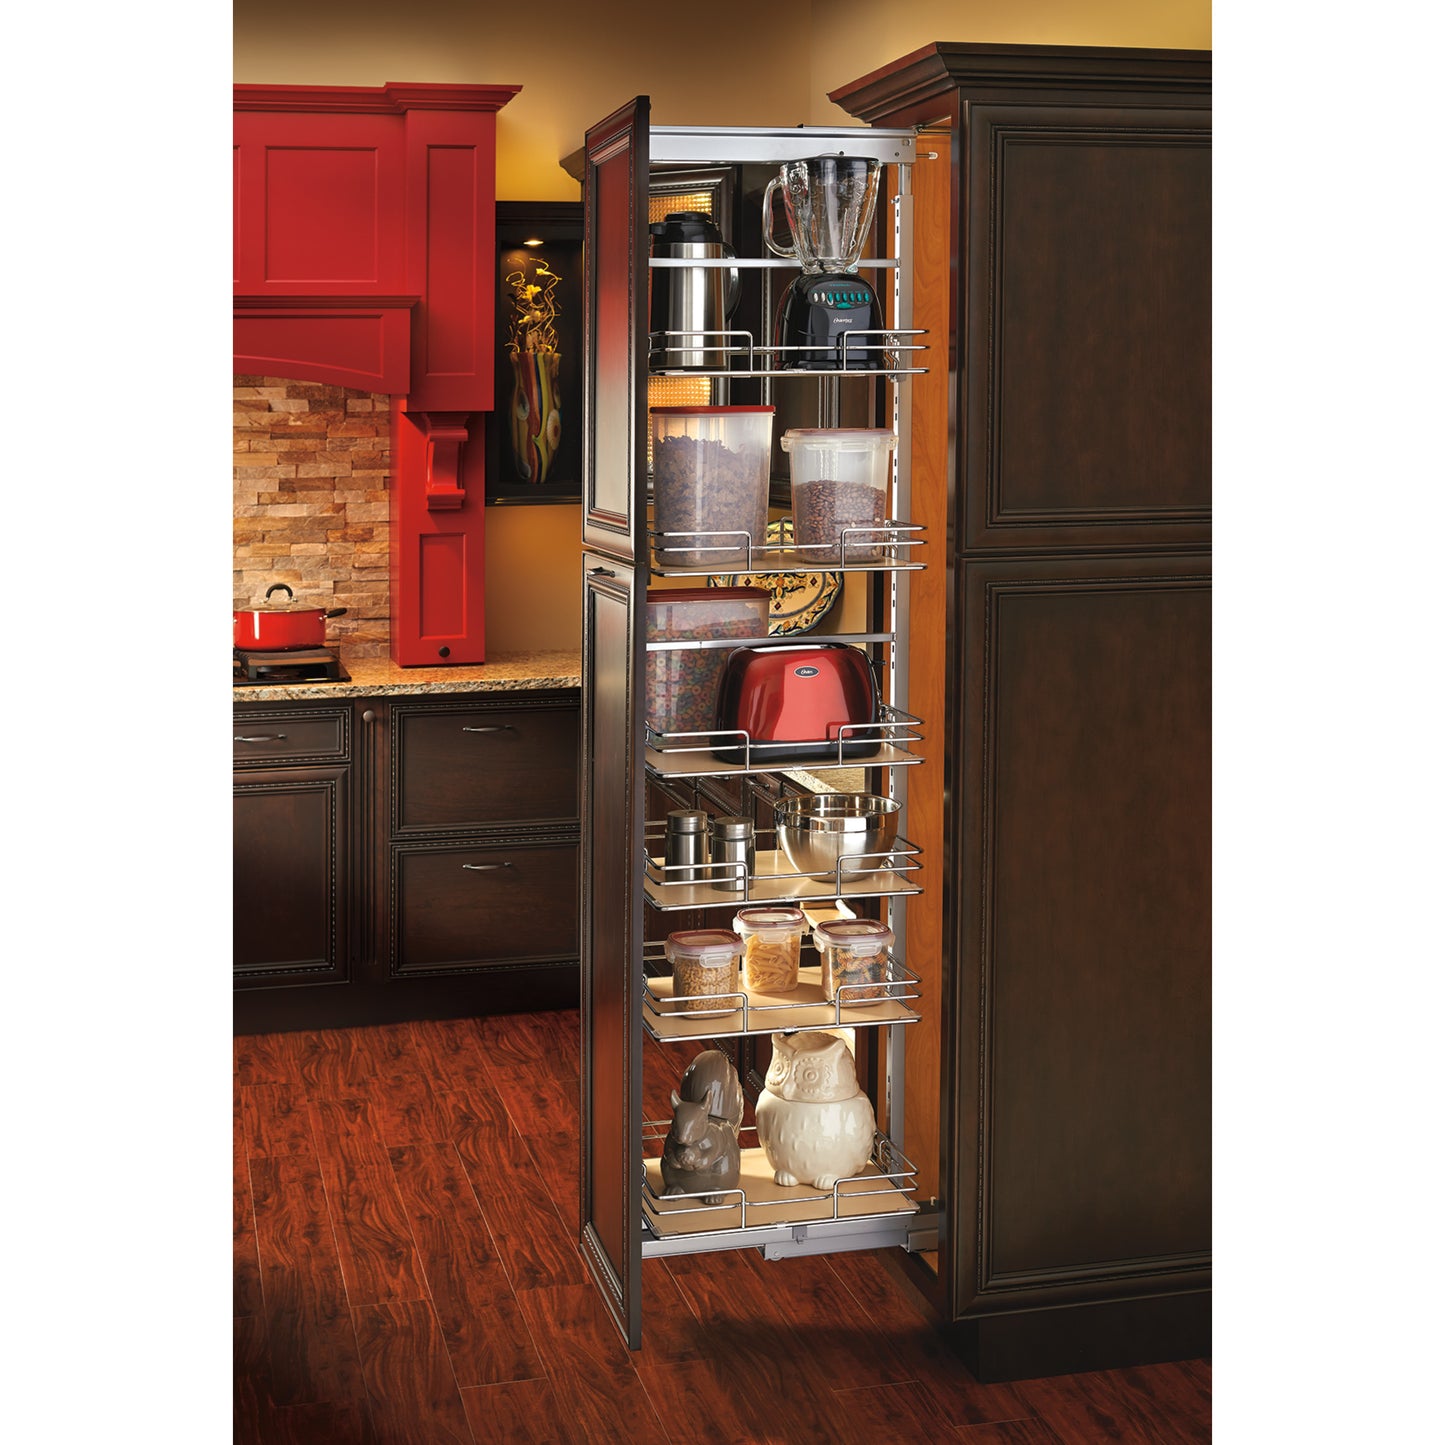 Rev-A-Shelf - Adjustable Solid Surface Pantry System for Tall Pantry Cabinets - 5258-09-MP